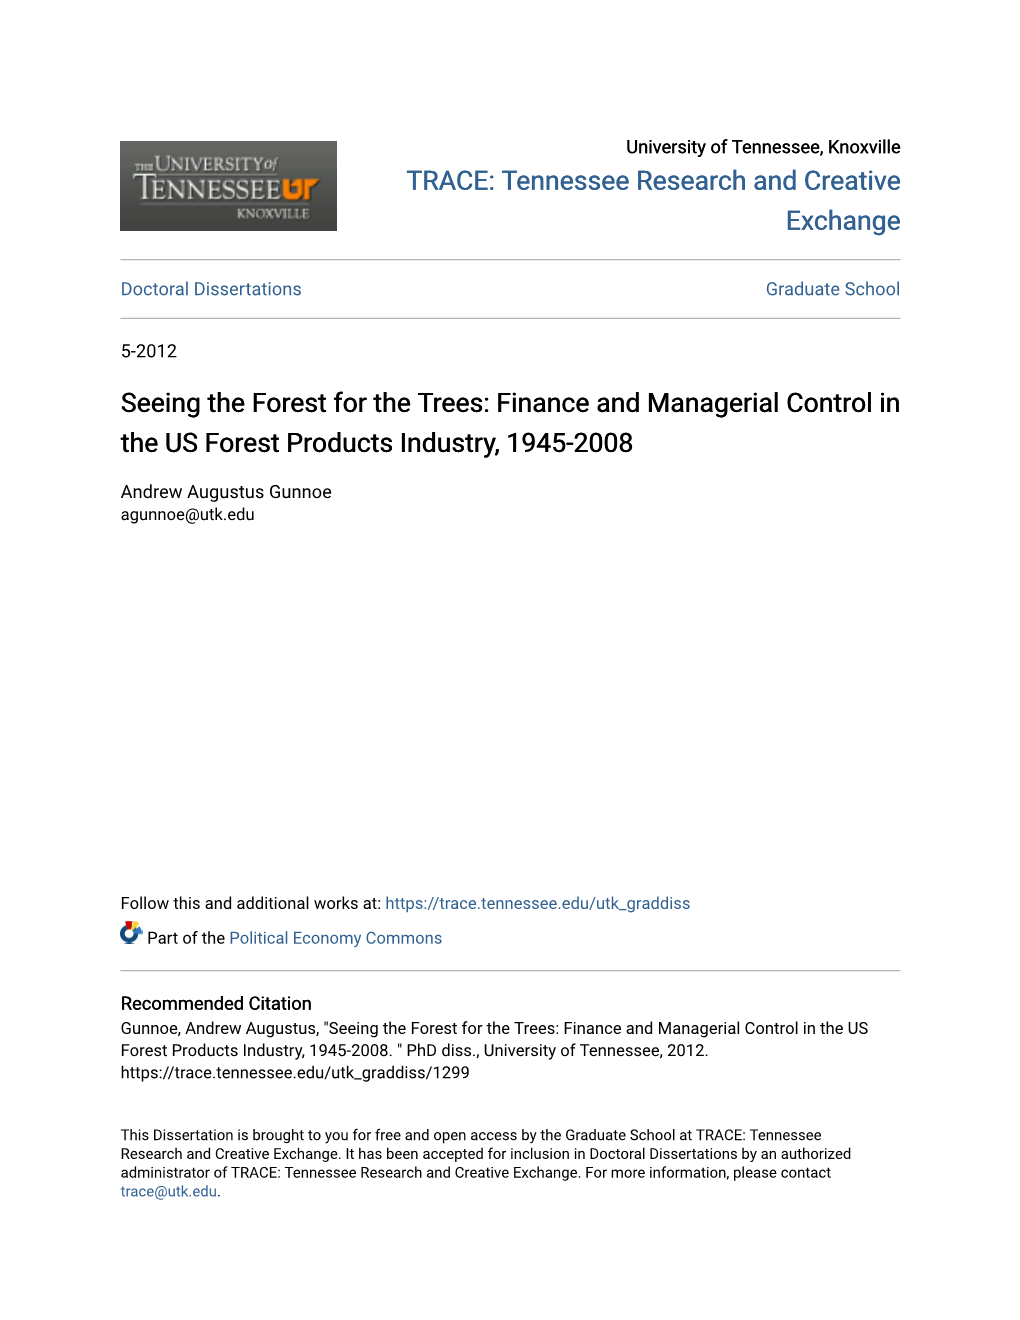 Finance and Managerial Control in the US Forest Products Industry, 1945-2008